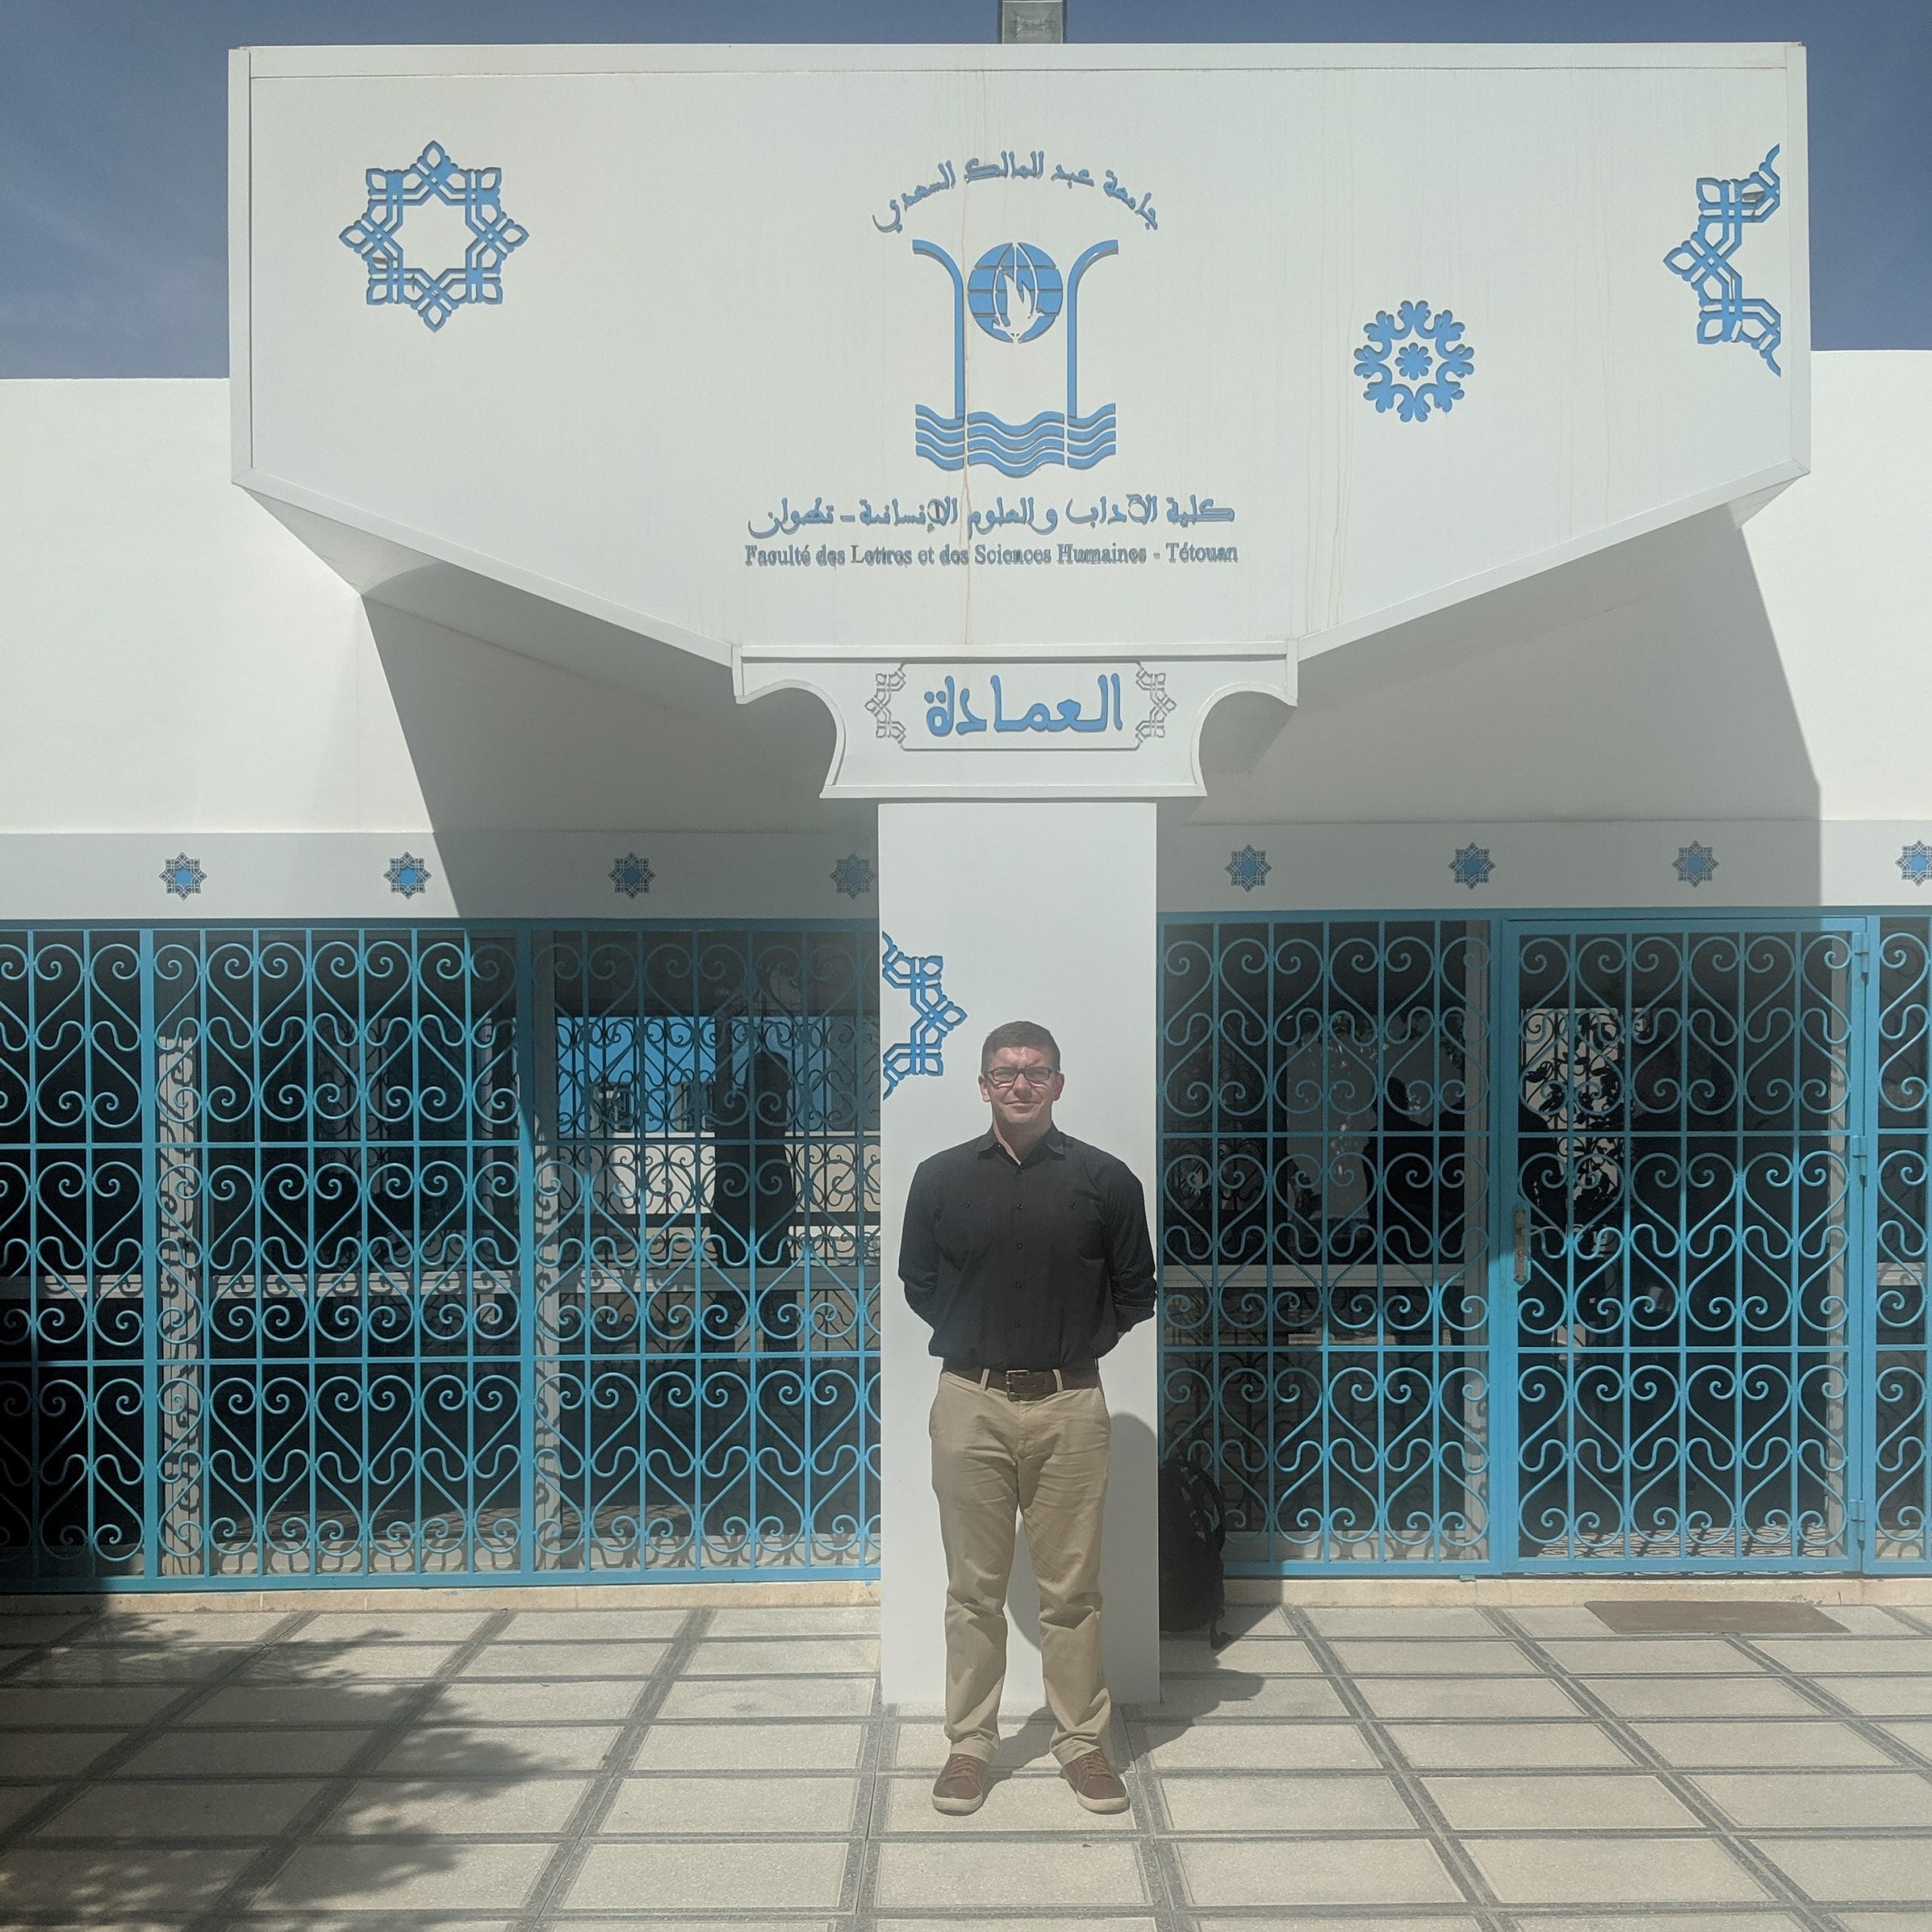 Caption- Thomas Tischler on the first day at his host institution in Morocco